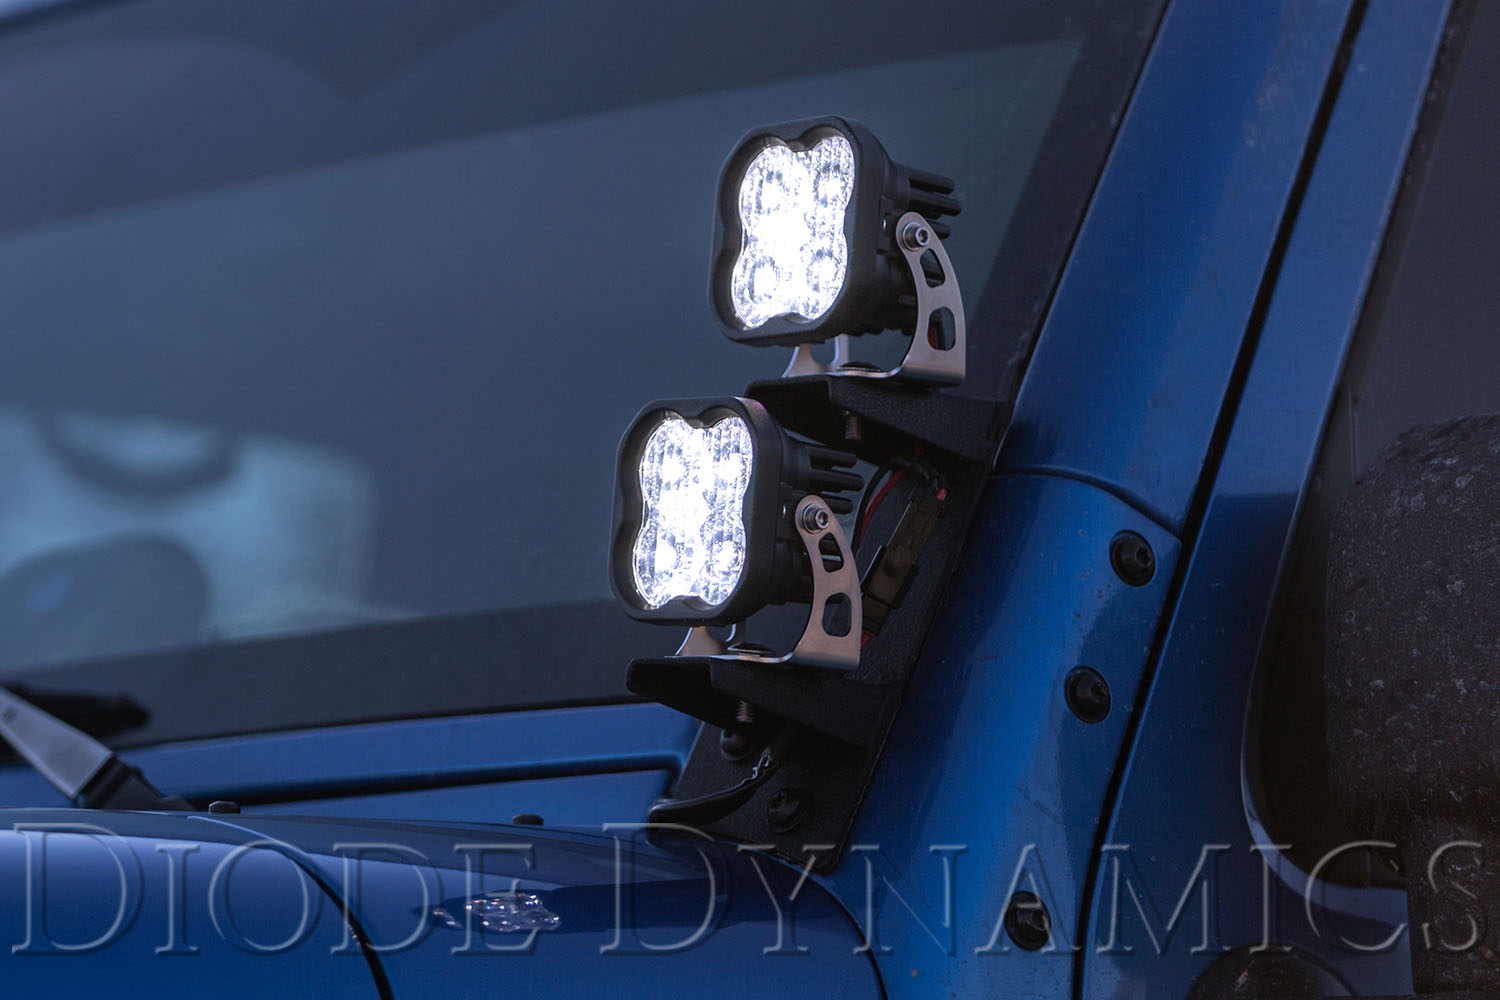 Picture of Diode Dynamics DD6487S Pod Light Featuring Advanced Tir Optics For High Efficiency And Focus.